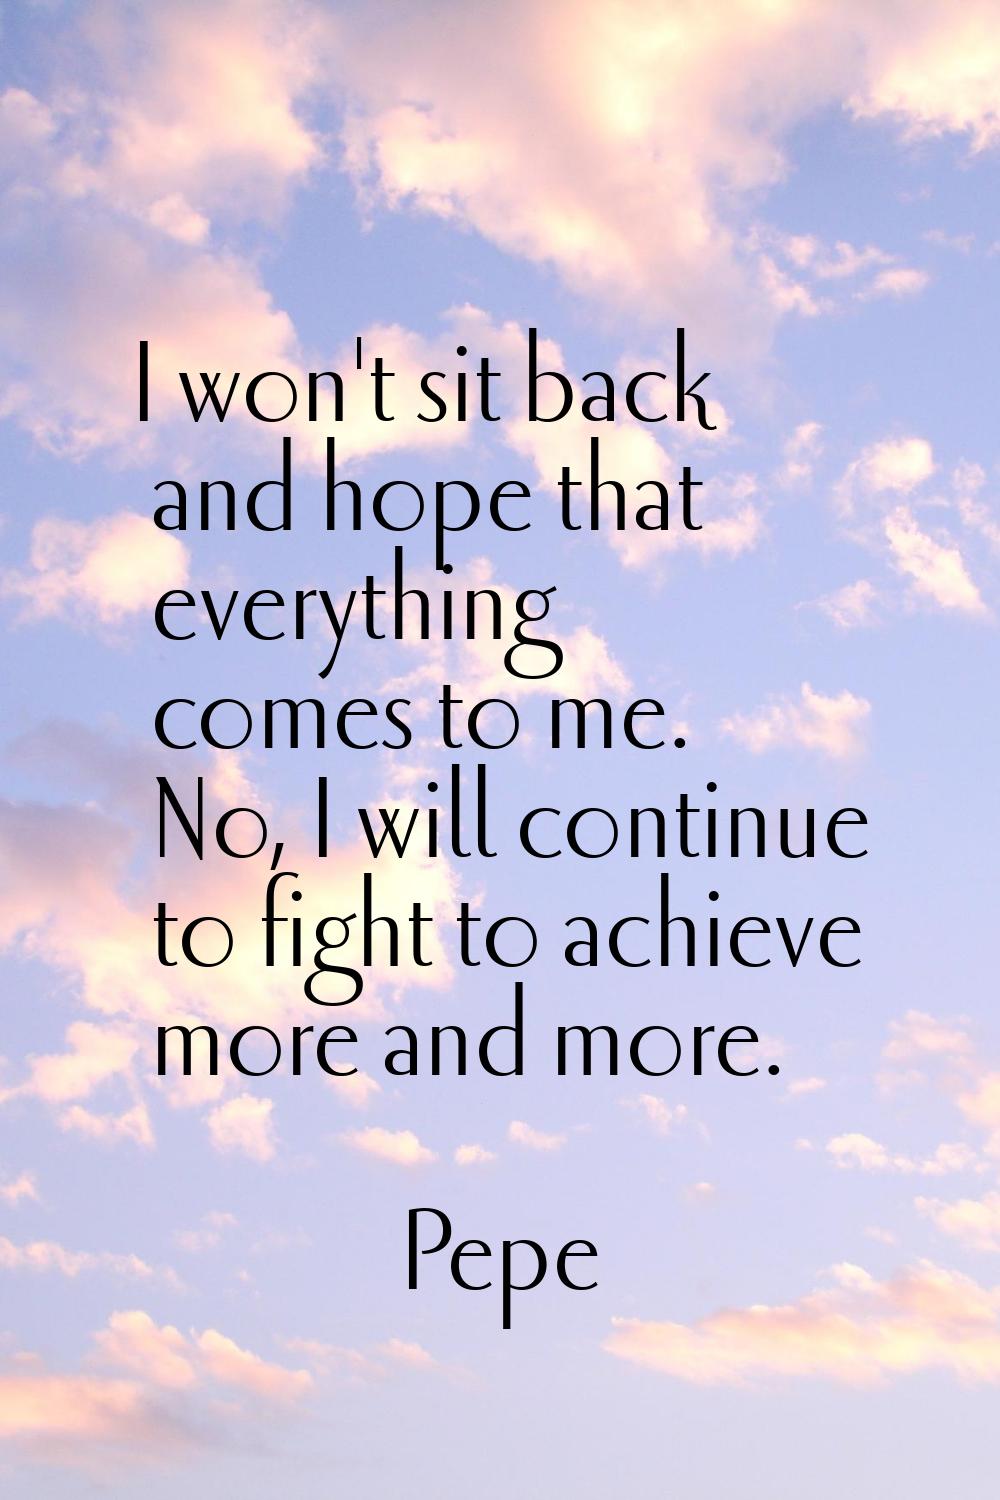 I won't sit back and hope that everything comes to me. No, I will continue to fight to achieve more